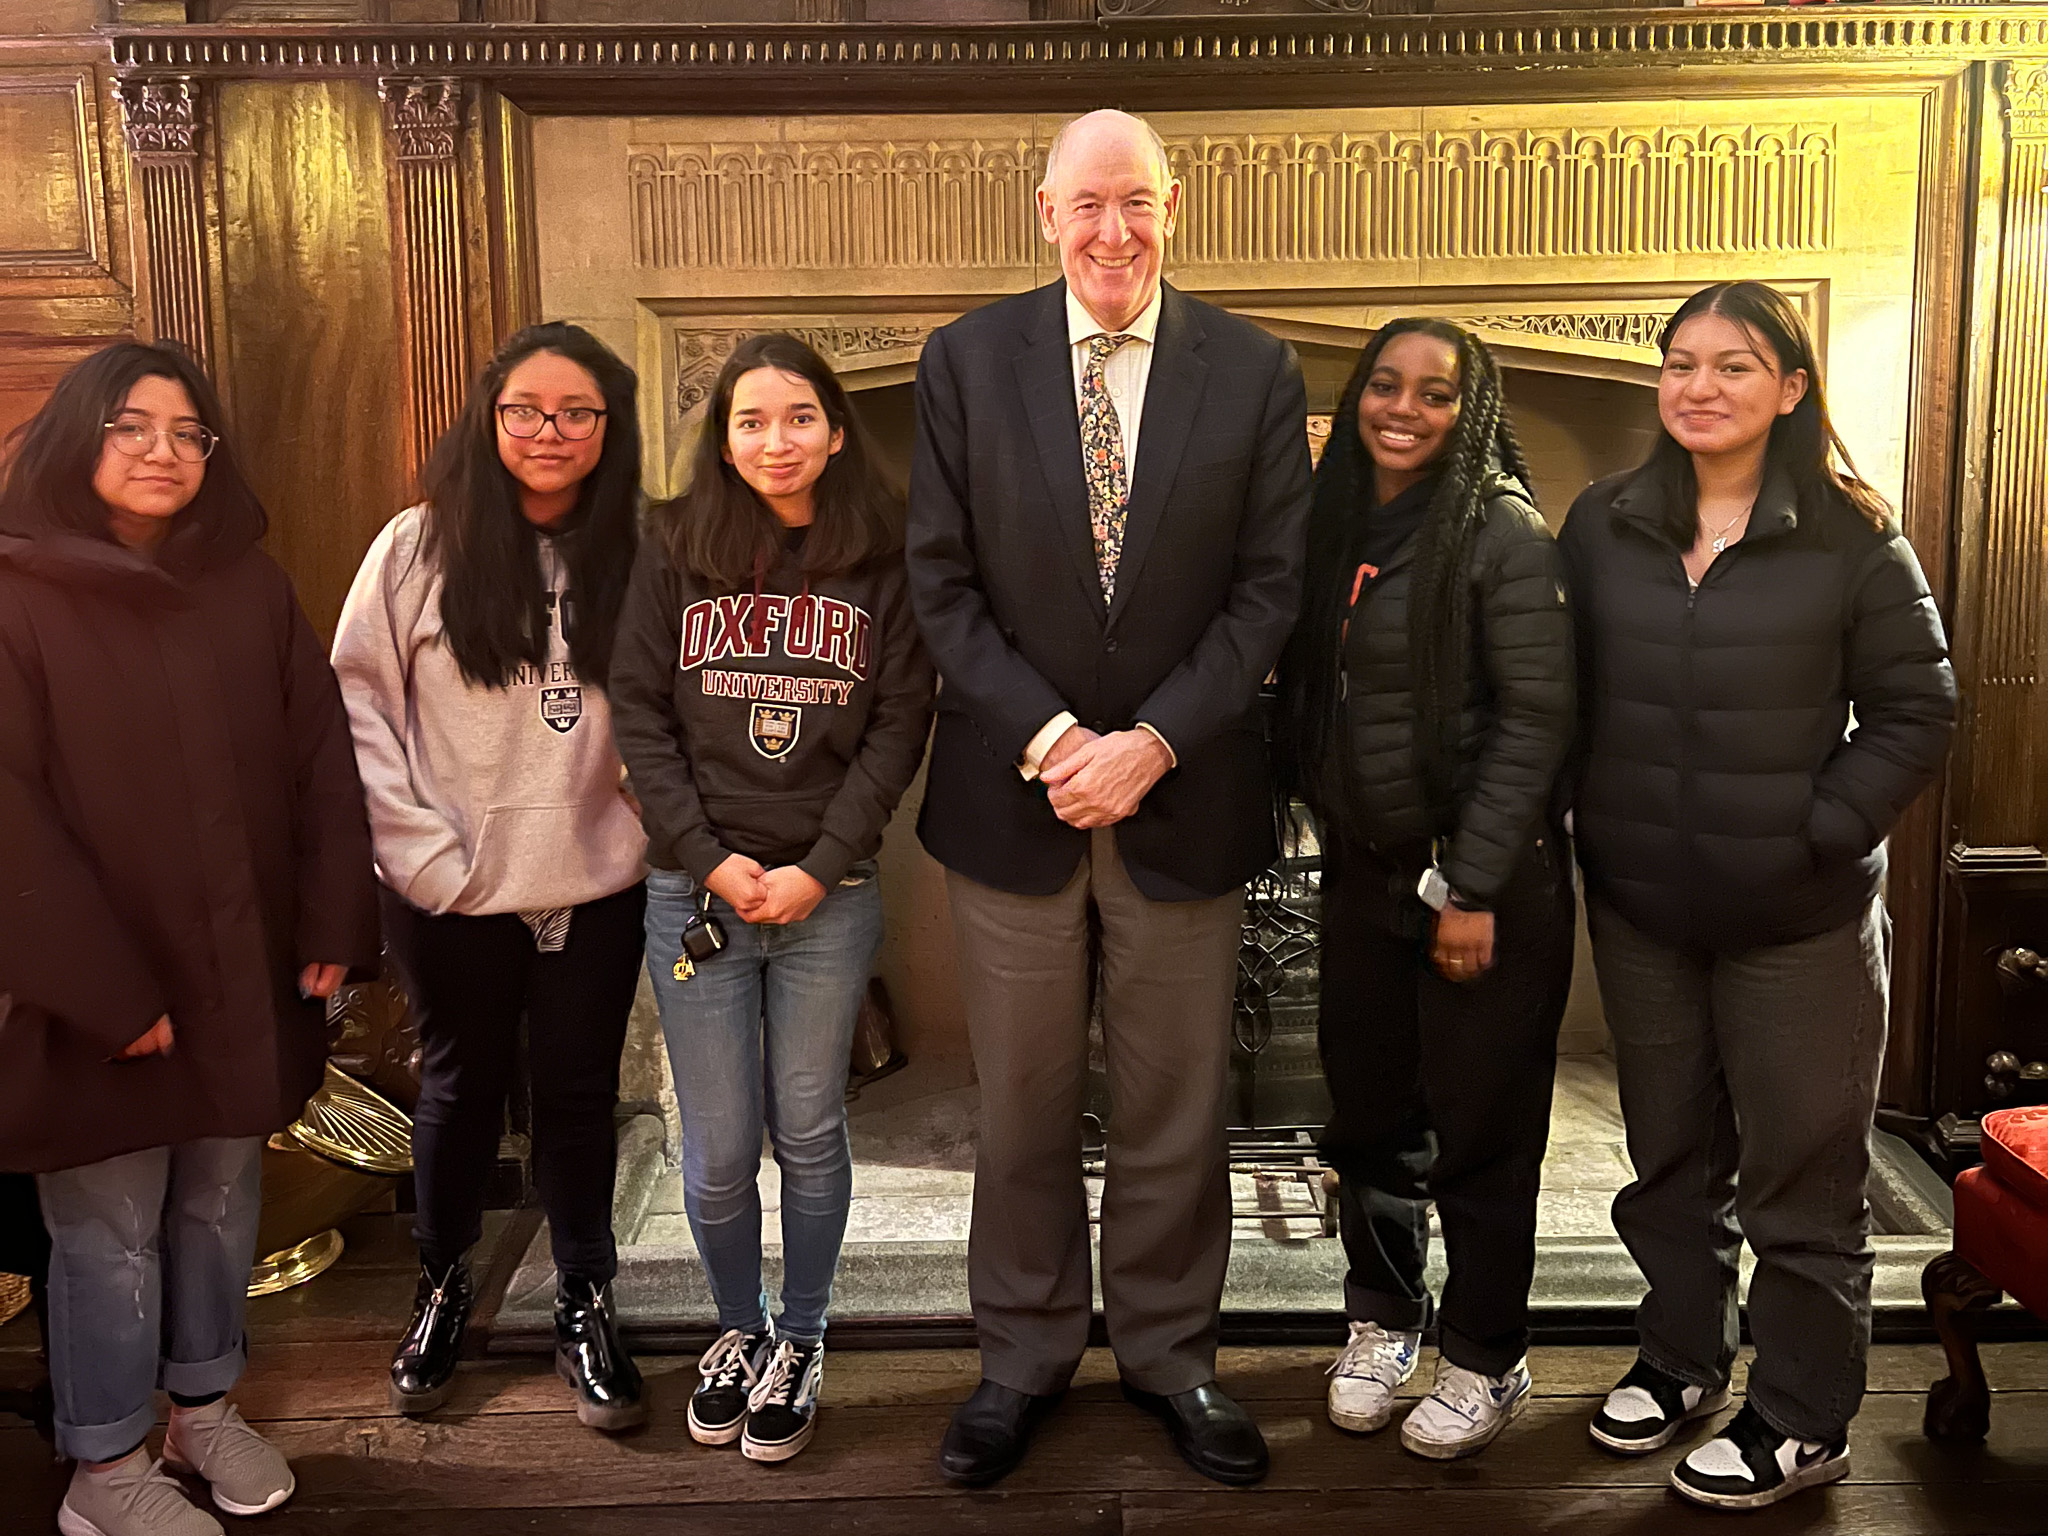 The Warden with five students standing in front of an old fireplace